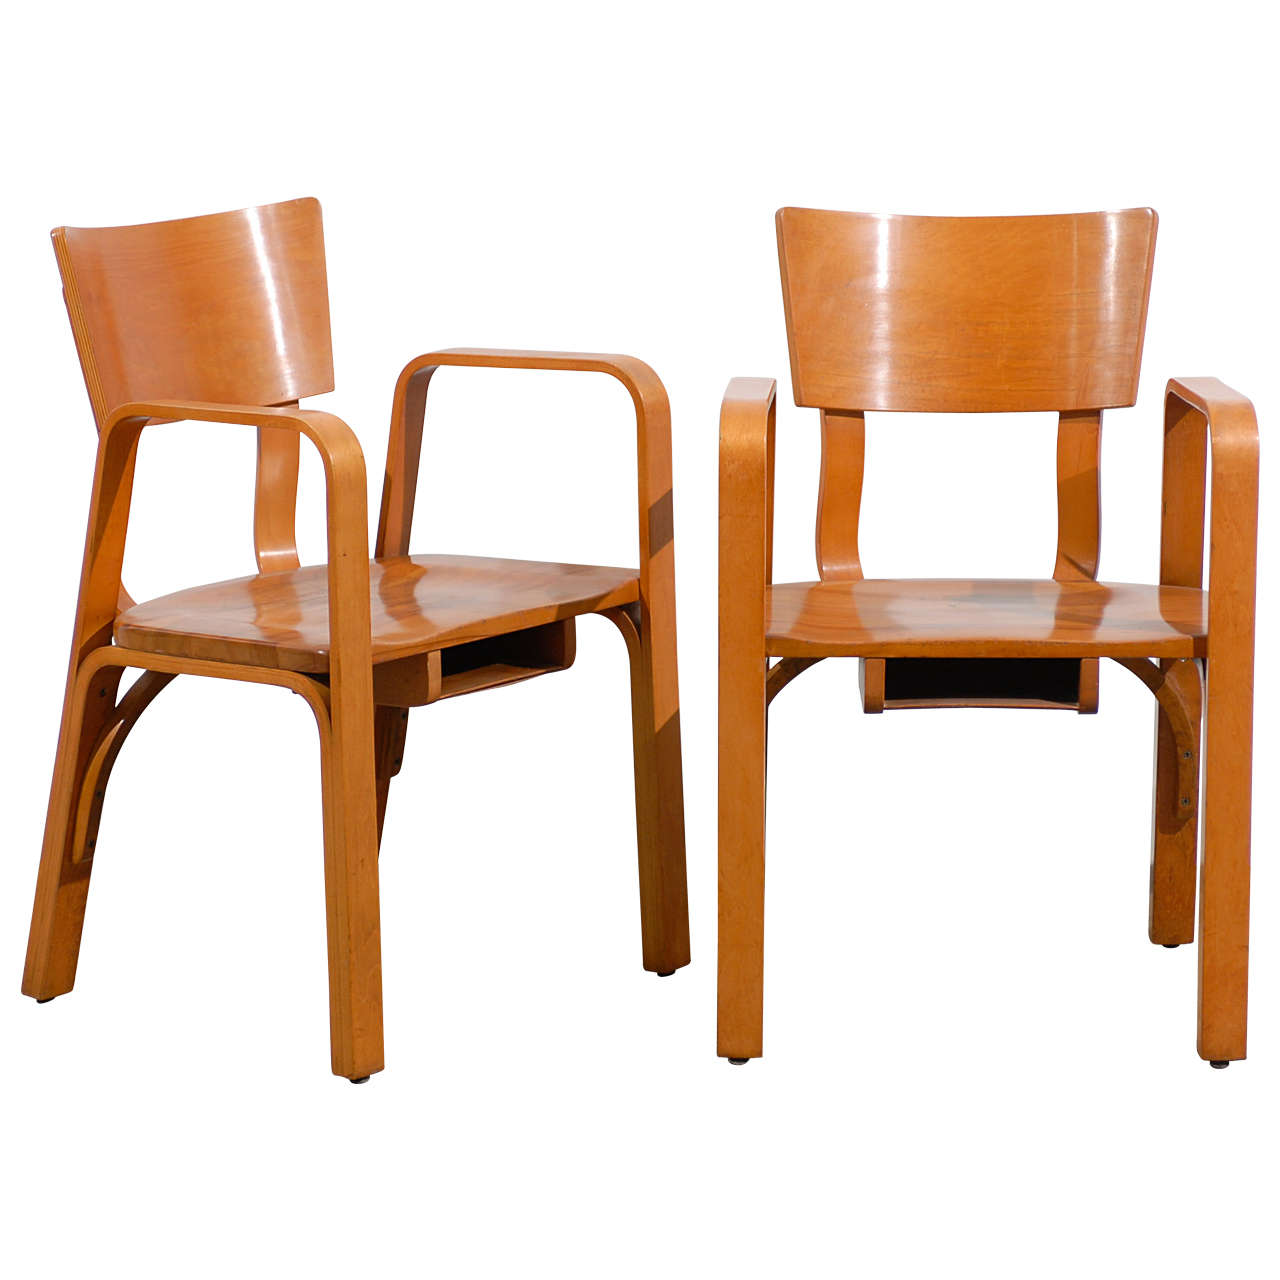 An Unusual Pair of Bent Plywood Arm Chairs by Thonet